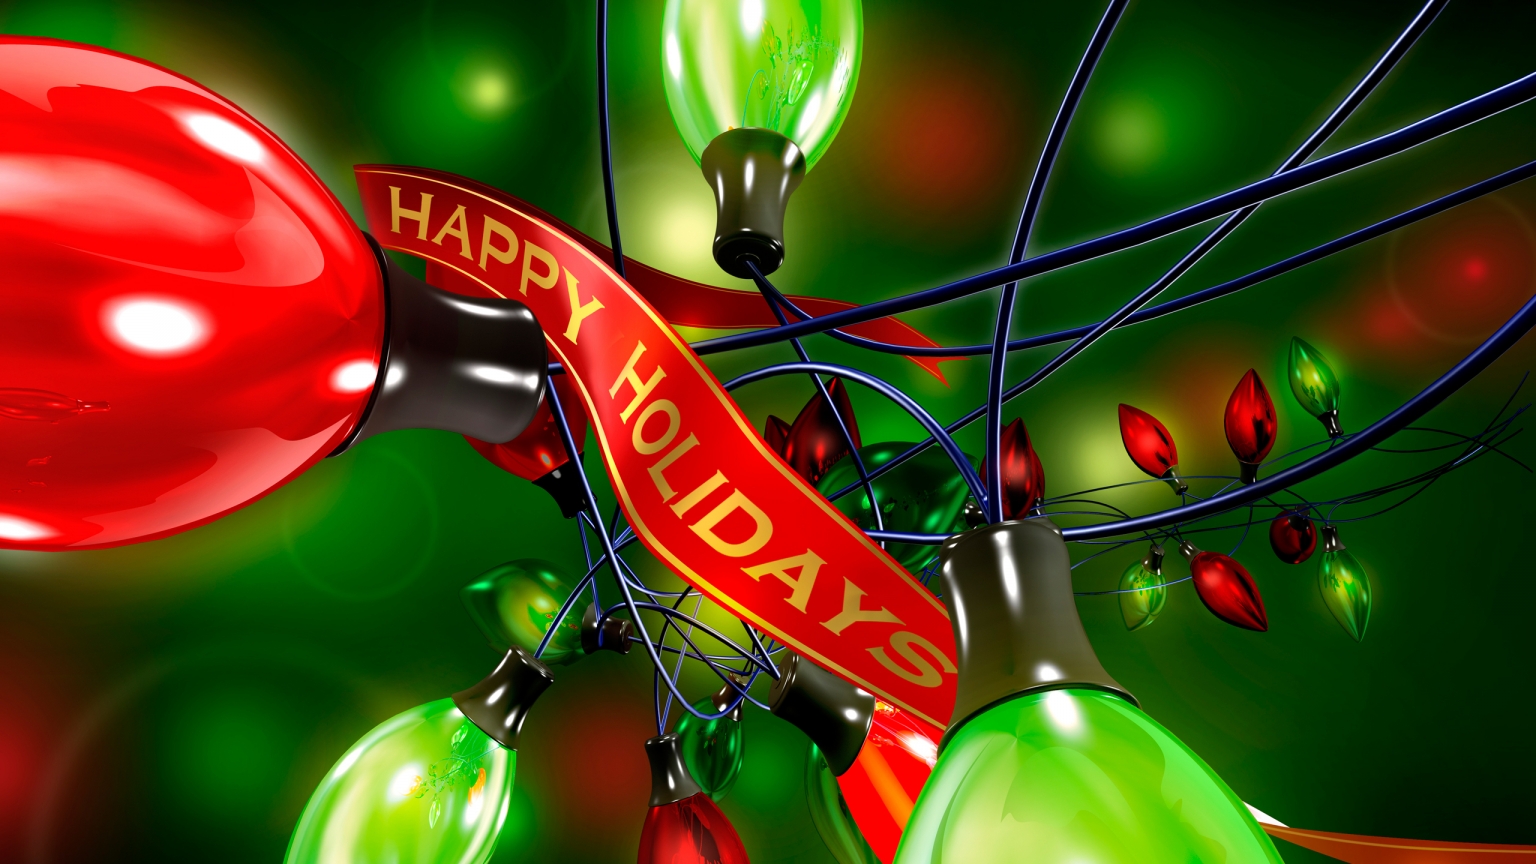 Happy Holidays Everyone for 1536 x 864 HDTV resolution